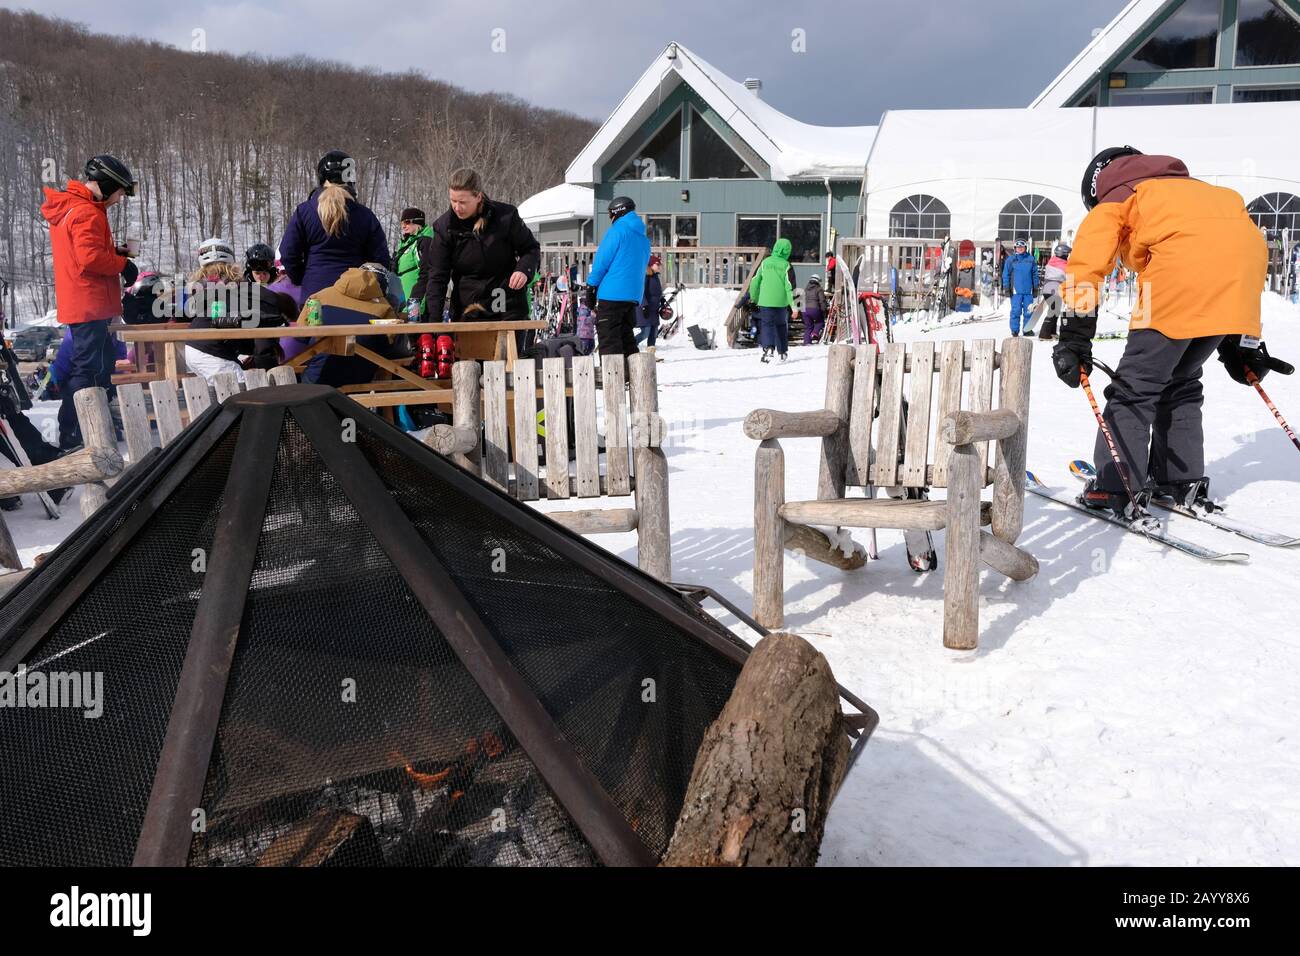 Outdoor fire pit, chalet and skier relaxing at Camp Fortune, Chelsea, Quebec, Canada. Stock Photo